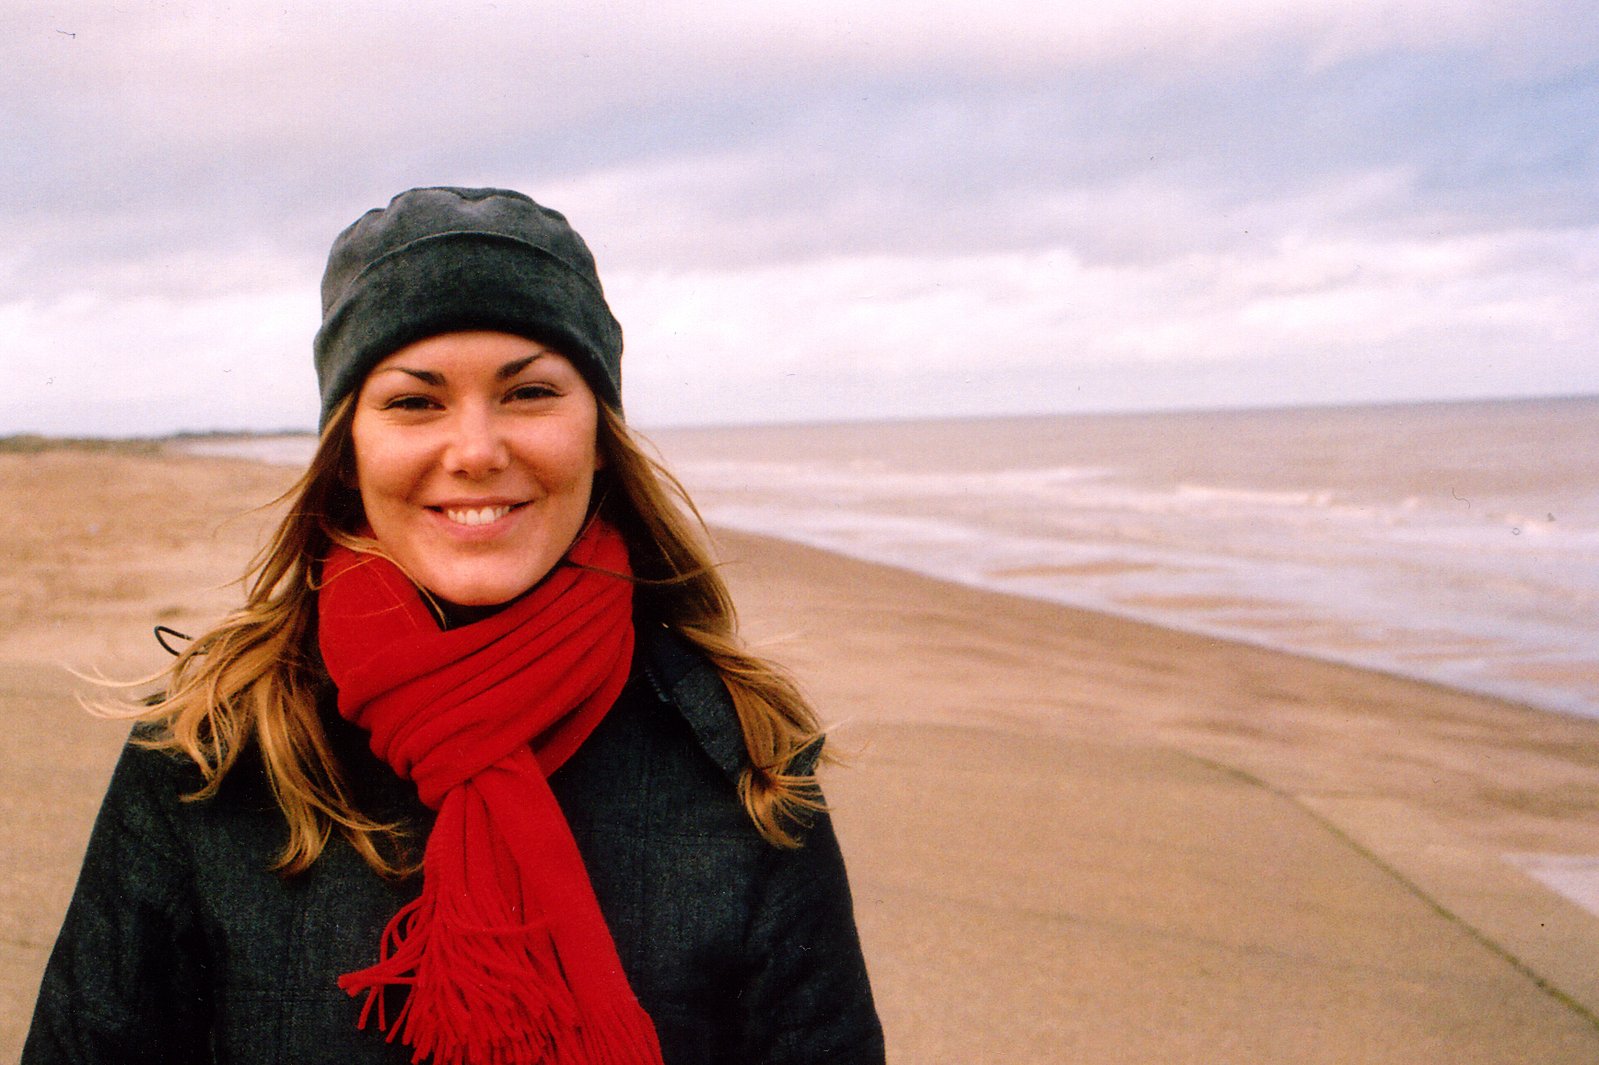 a woman smiles while wearing a black hat and red scarf